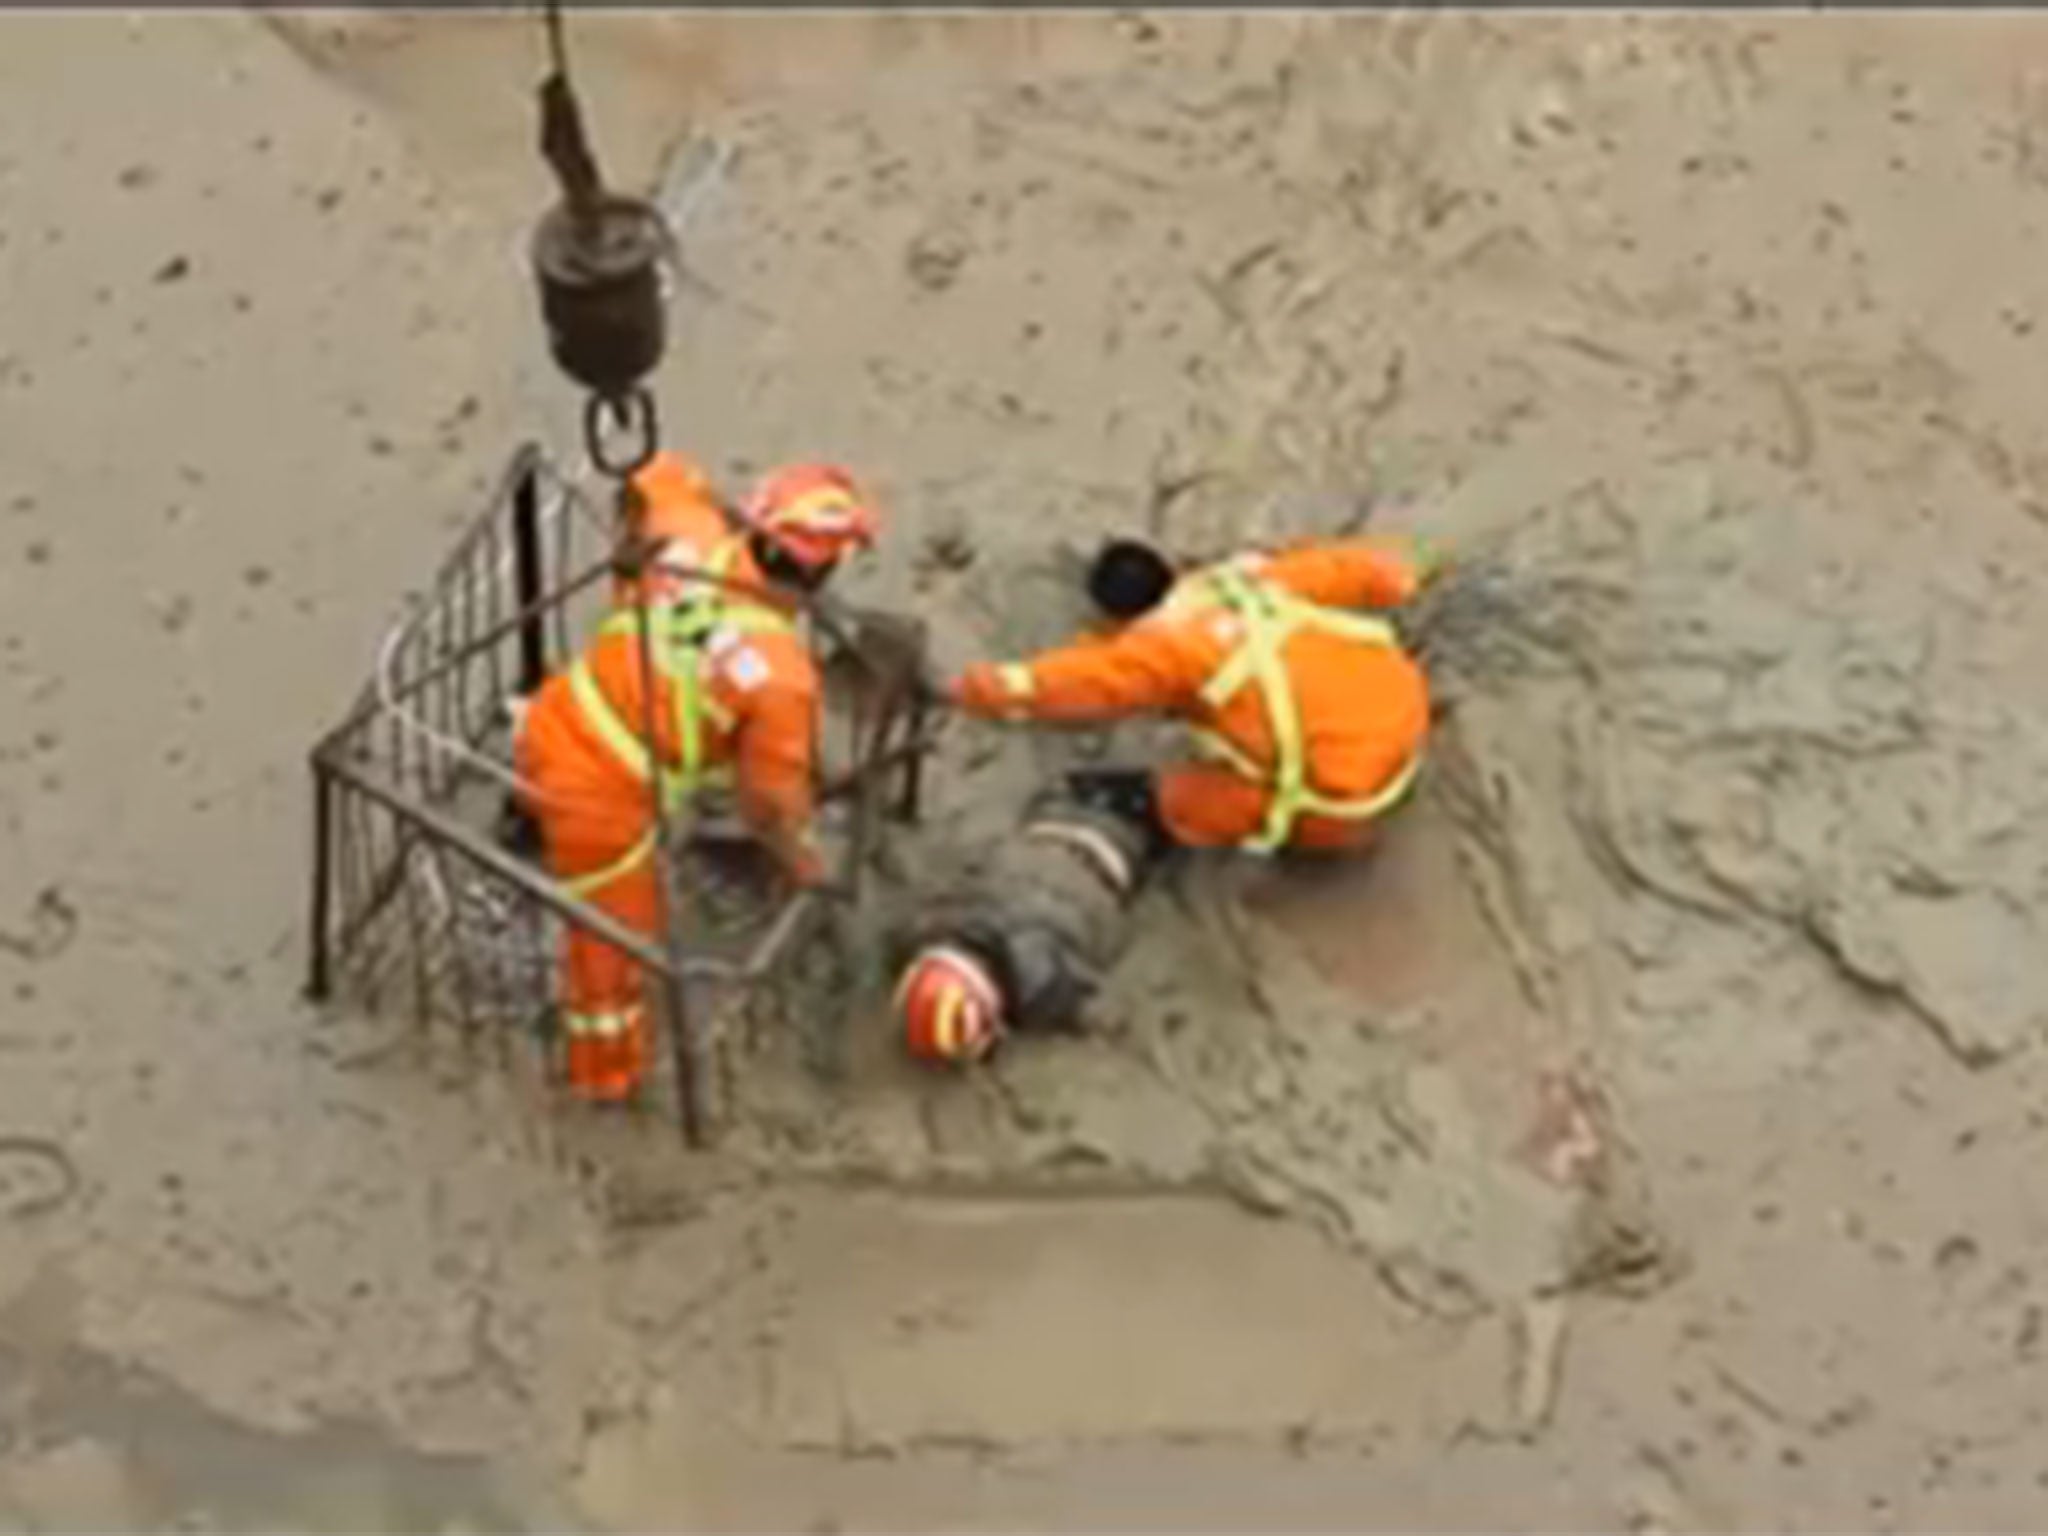 The man was stuck for nearly an hour before rescue workers pulled him out of the mud